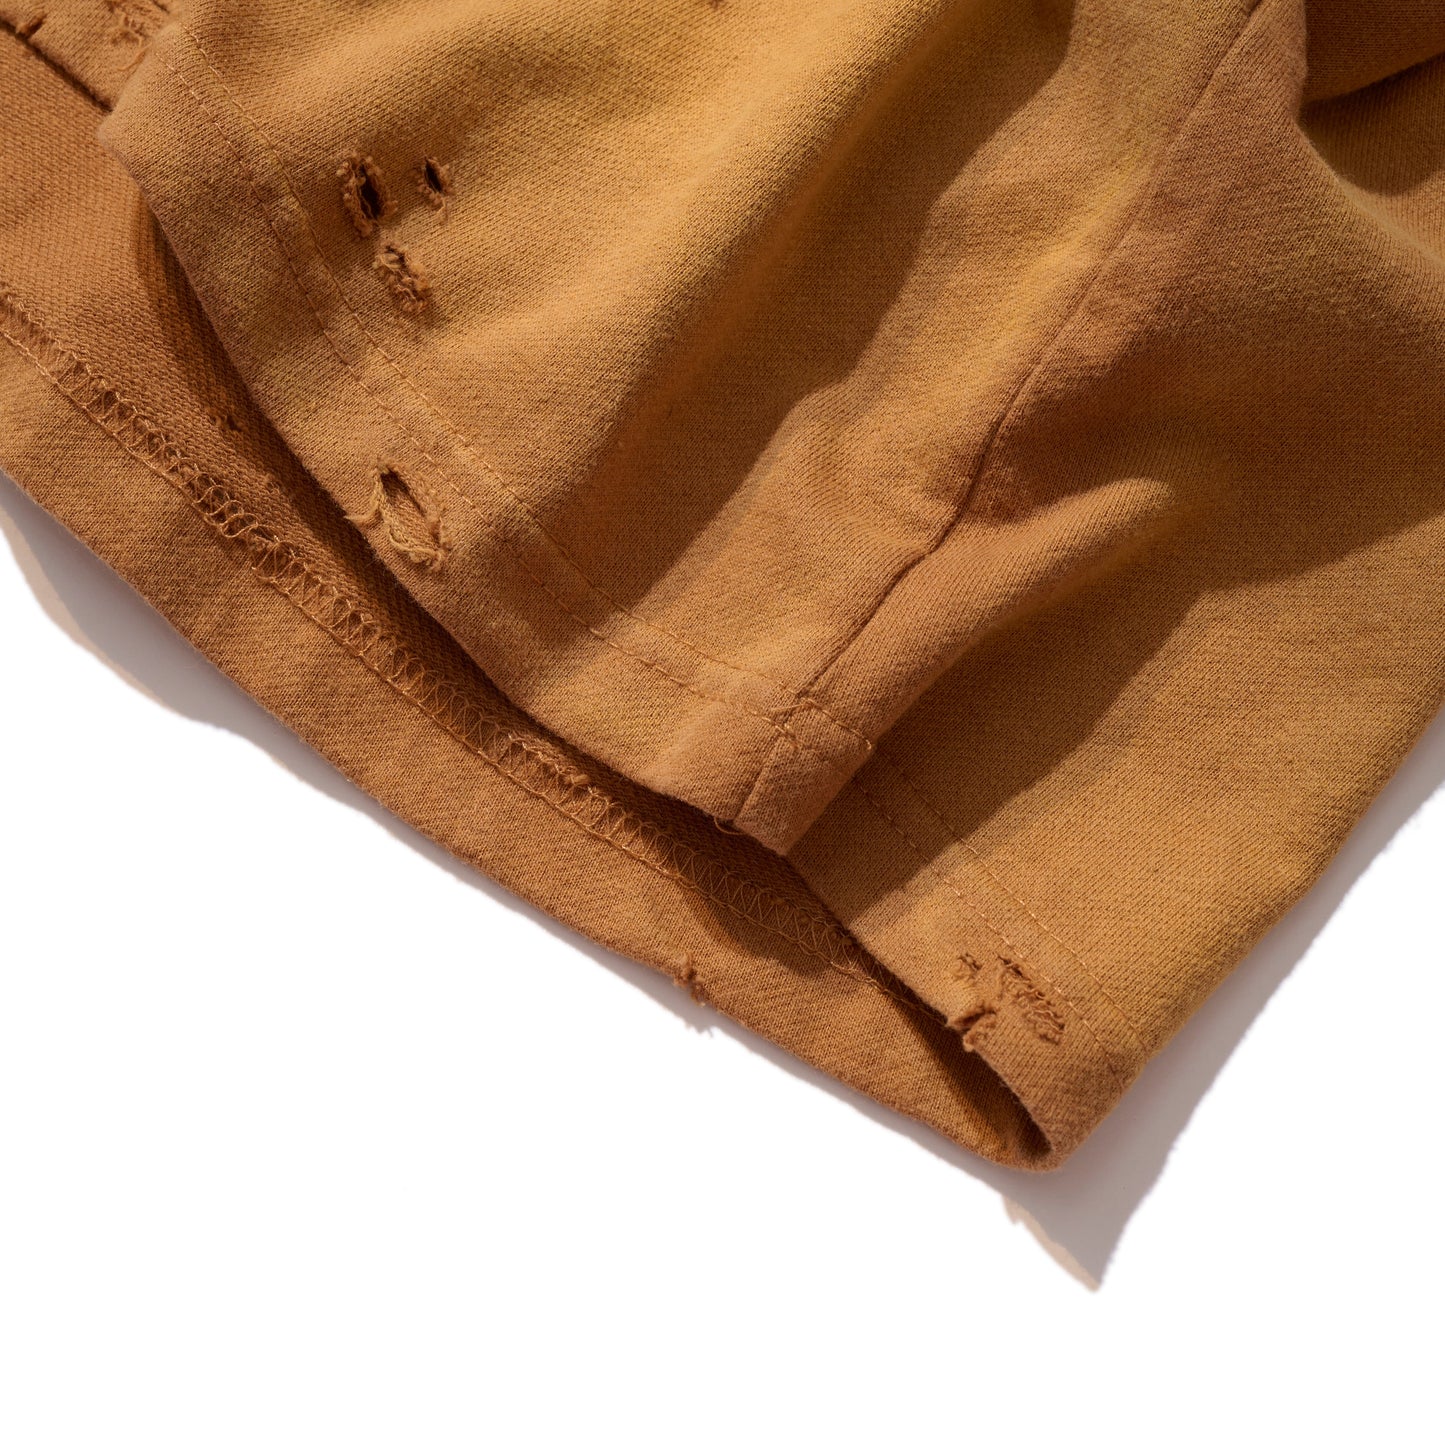 SUN FADED HAND STENCIL WASHED “KOWLOON” TEE / SEPIA BROWN